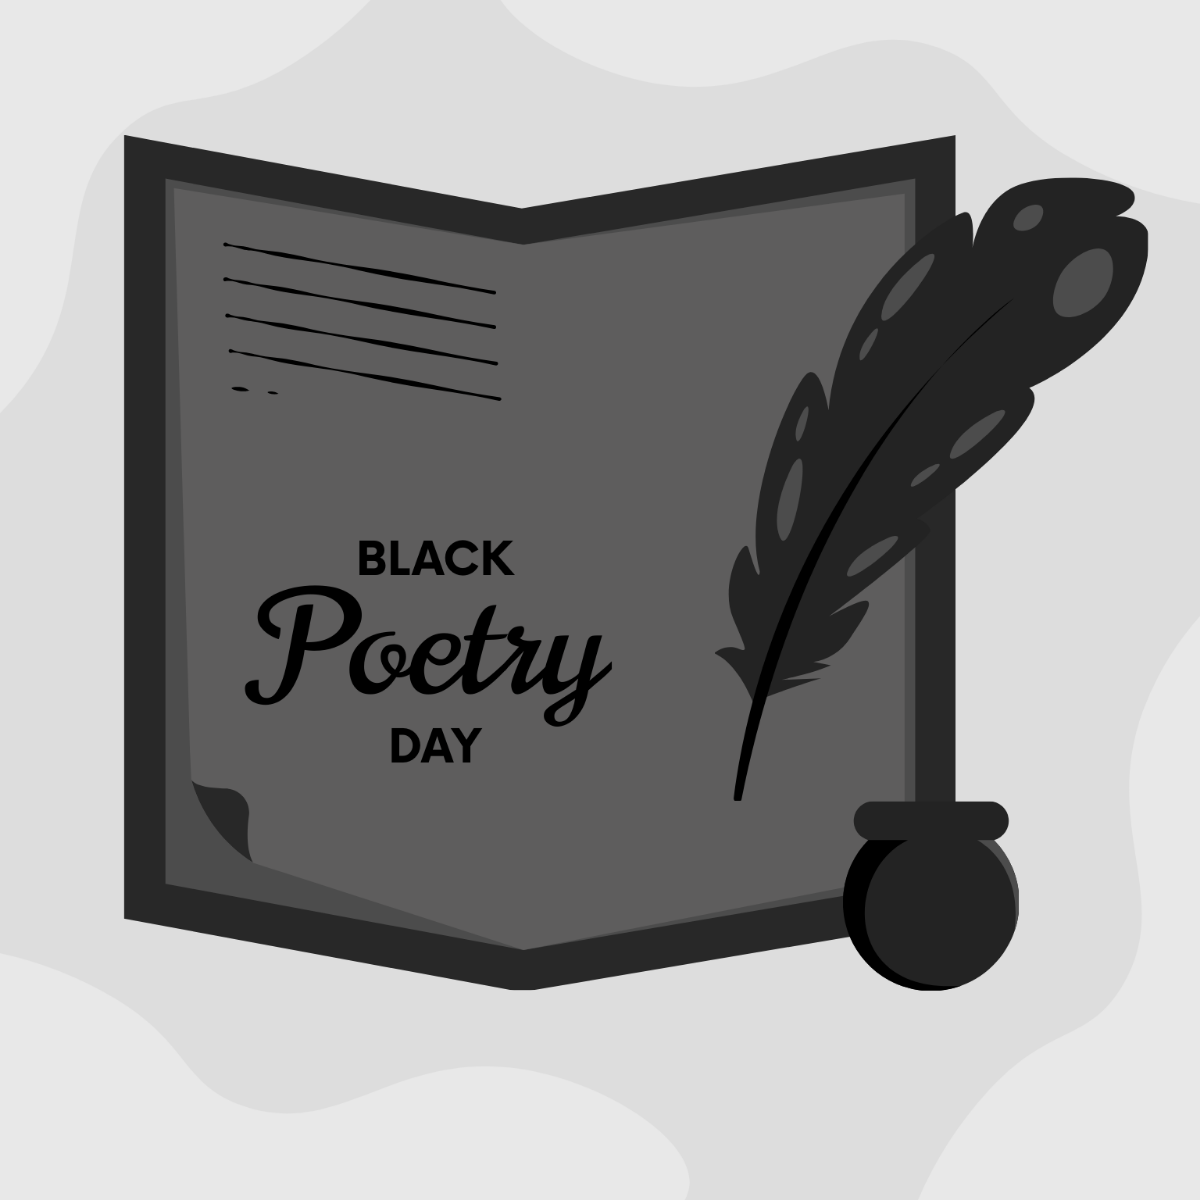 Black Poetry Day Illustration Template